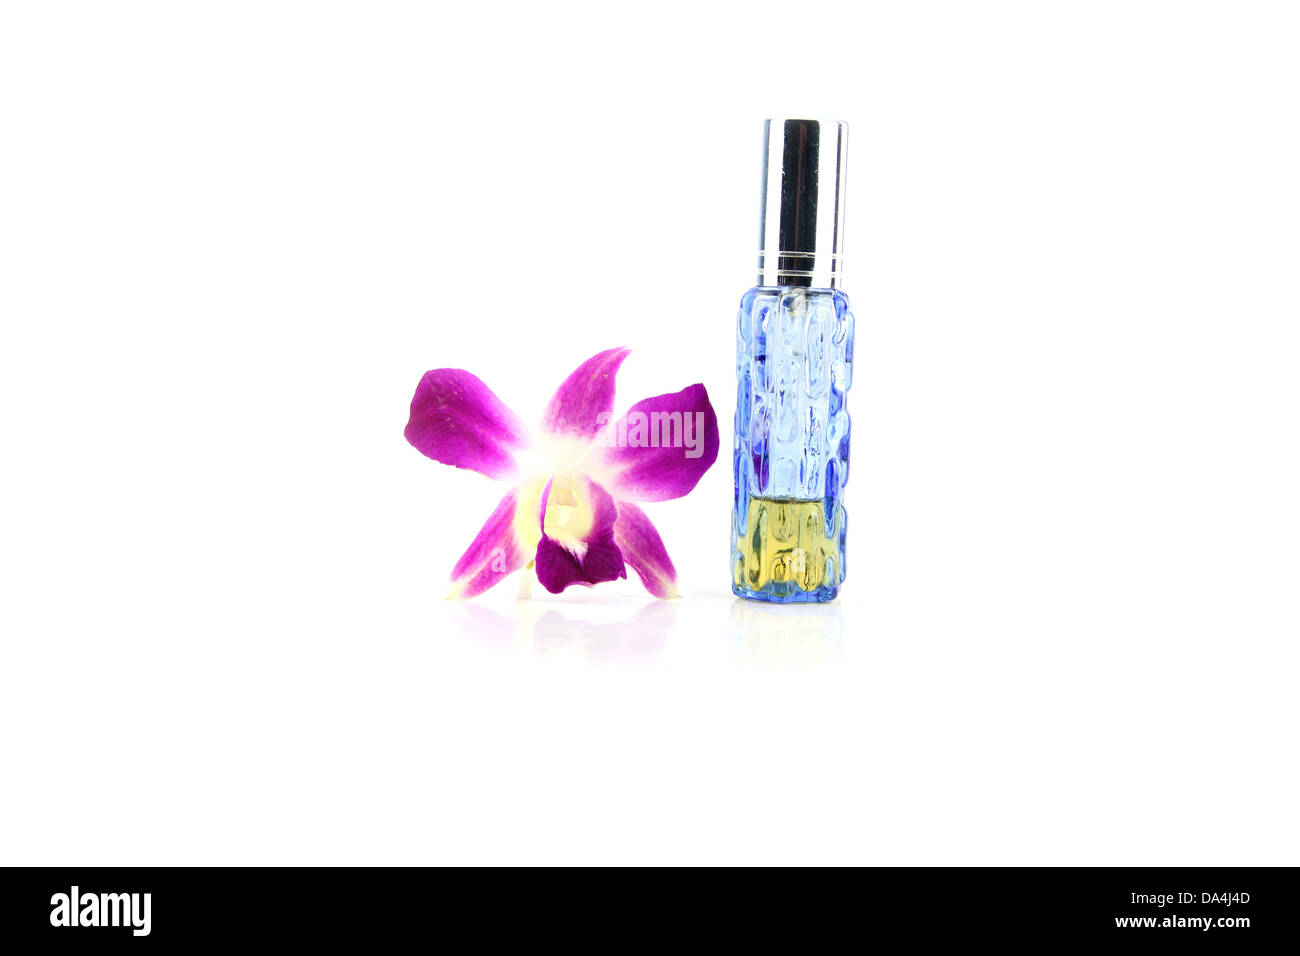 The Purple orchid and blue color Perfume bottles on the white background. Stock Photo